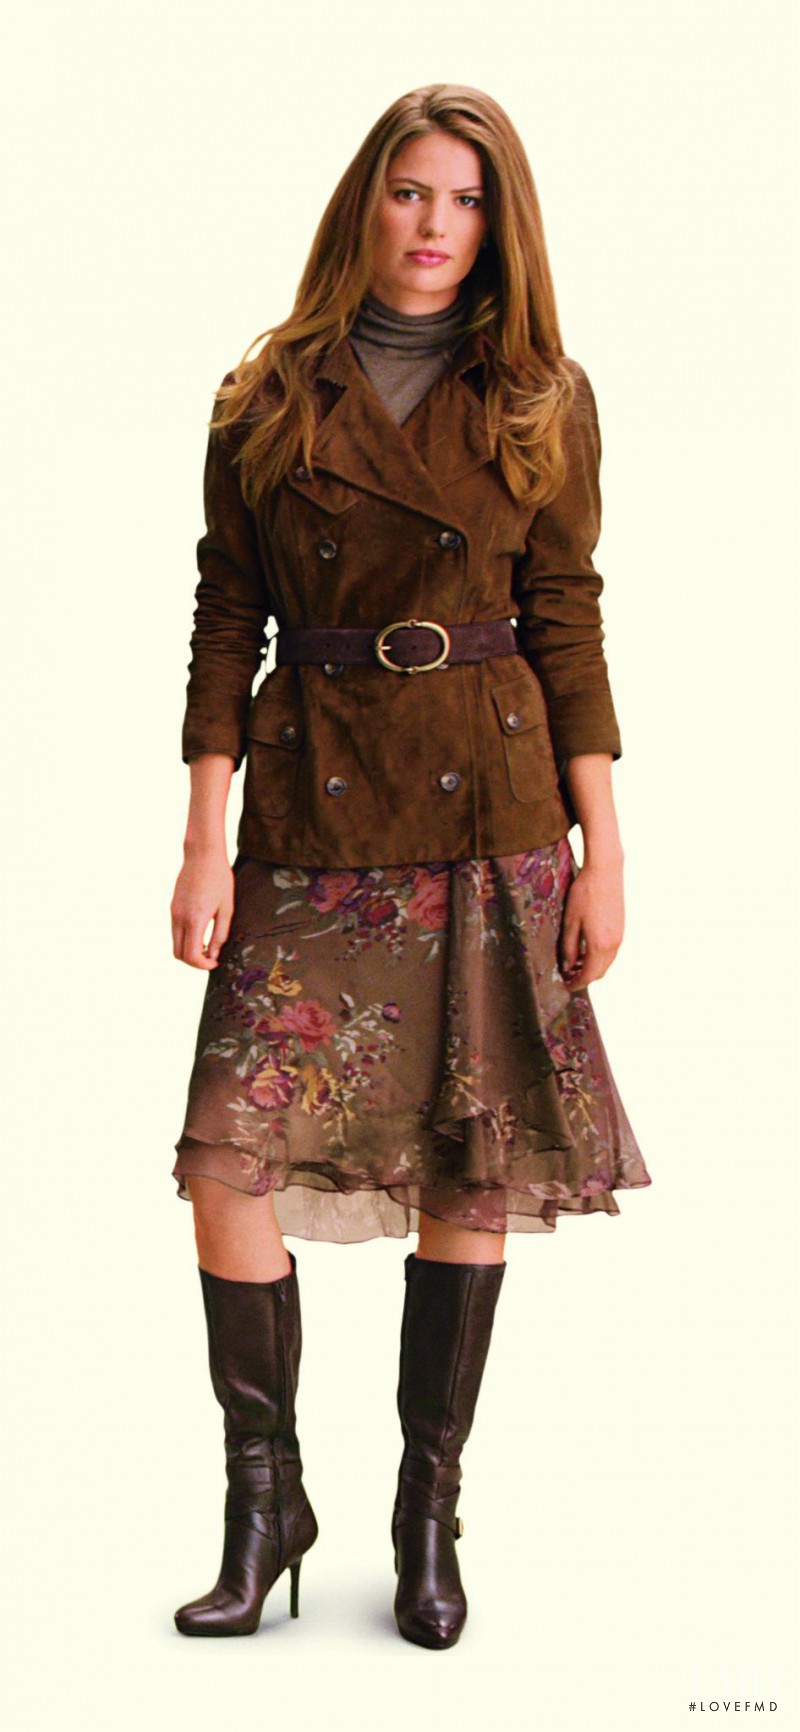 Cameron Russell featured in  the Lauren by Ralph Lauren catalogue for Fall 2011